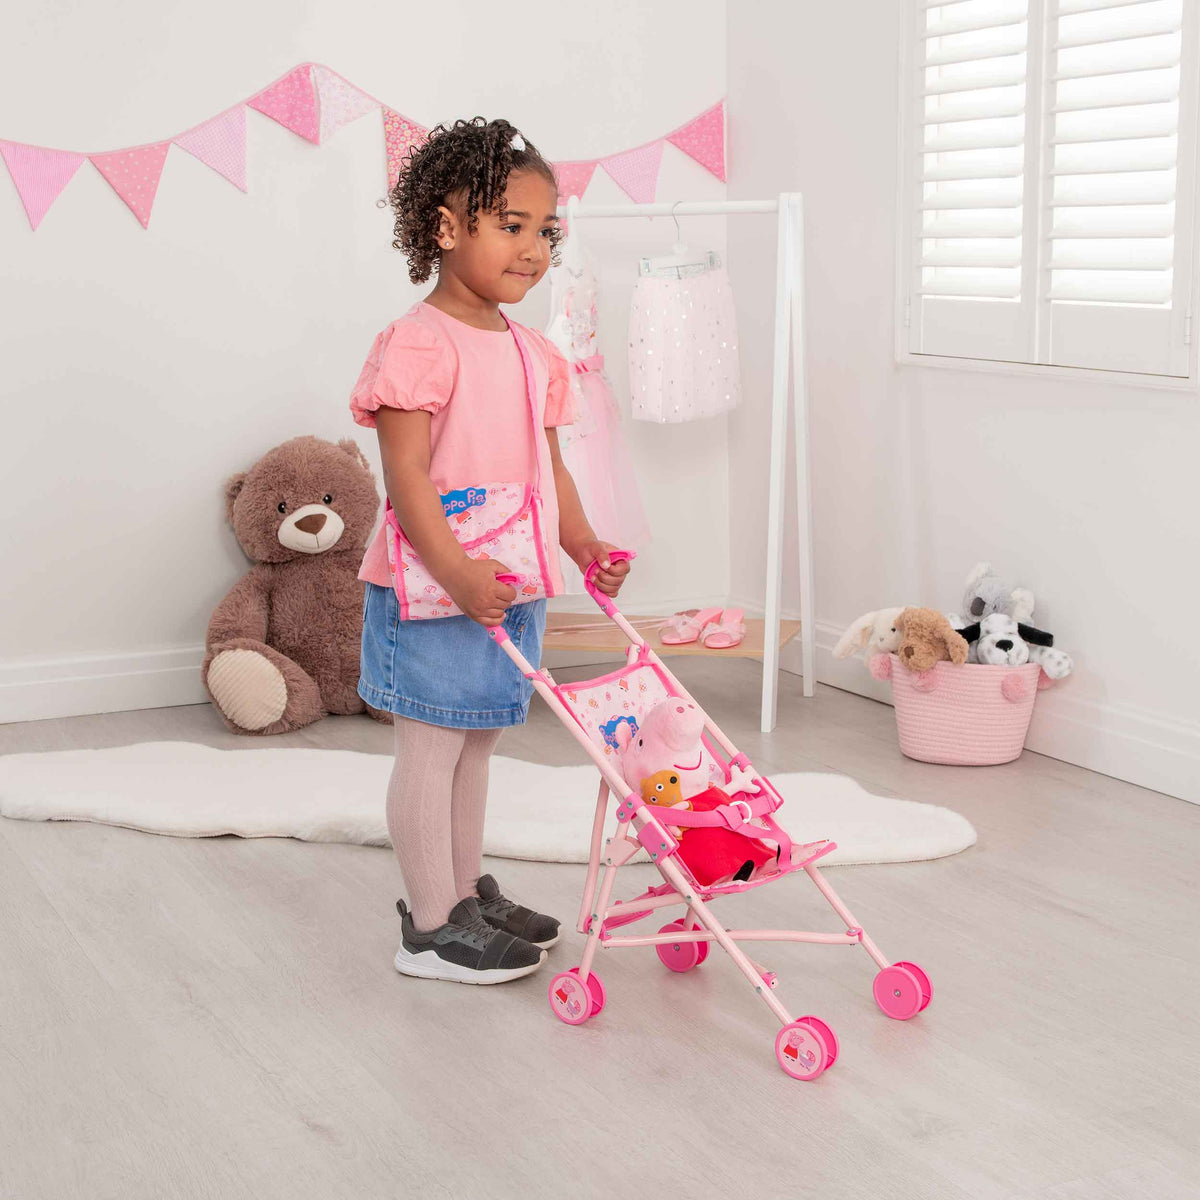 Peppa Pig Nursery Bundle - 7 Piece Playset: A colourful Peppa Pig-themed toy set including a high chair, stroller, Feeding set, perfect for toddlers&#39; imaginative play and doll care.